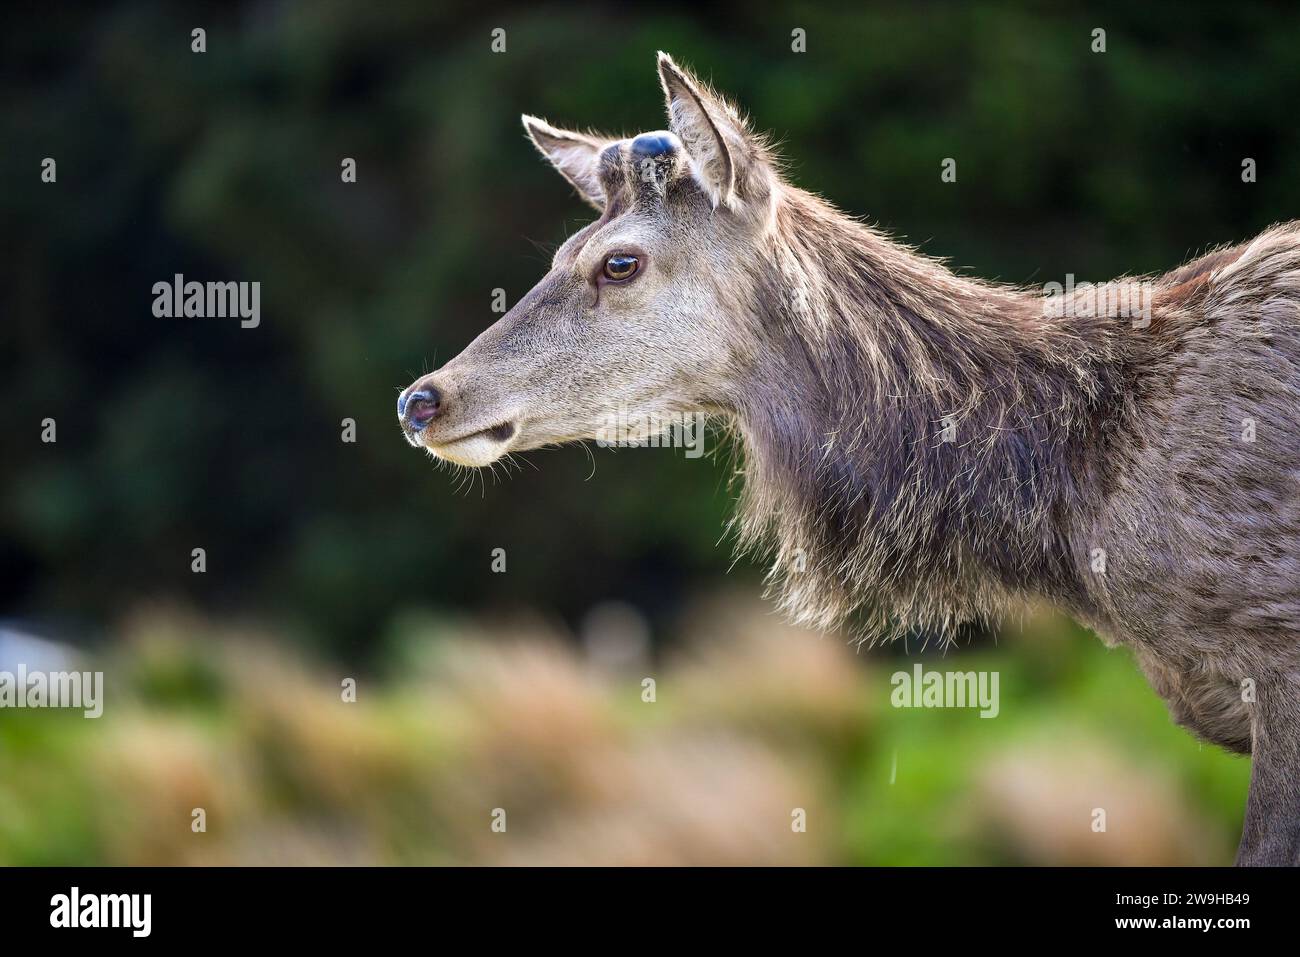 Profile Of A Young Male Red Deer With Antler Buds  At Kingshouse Hotel, Glencoe, Ballachulish, Scotland, United Kingdom, UK Stock Photo